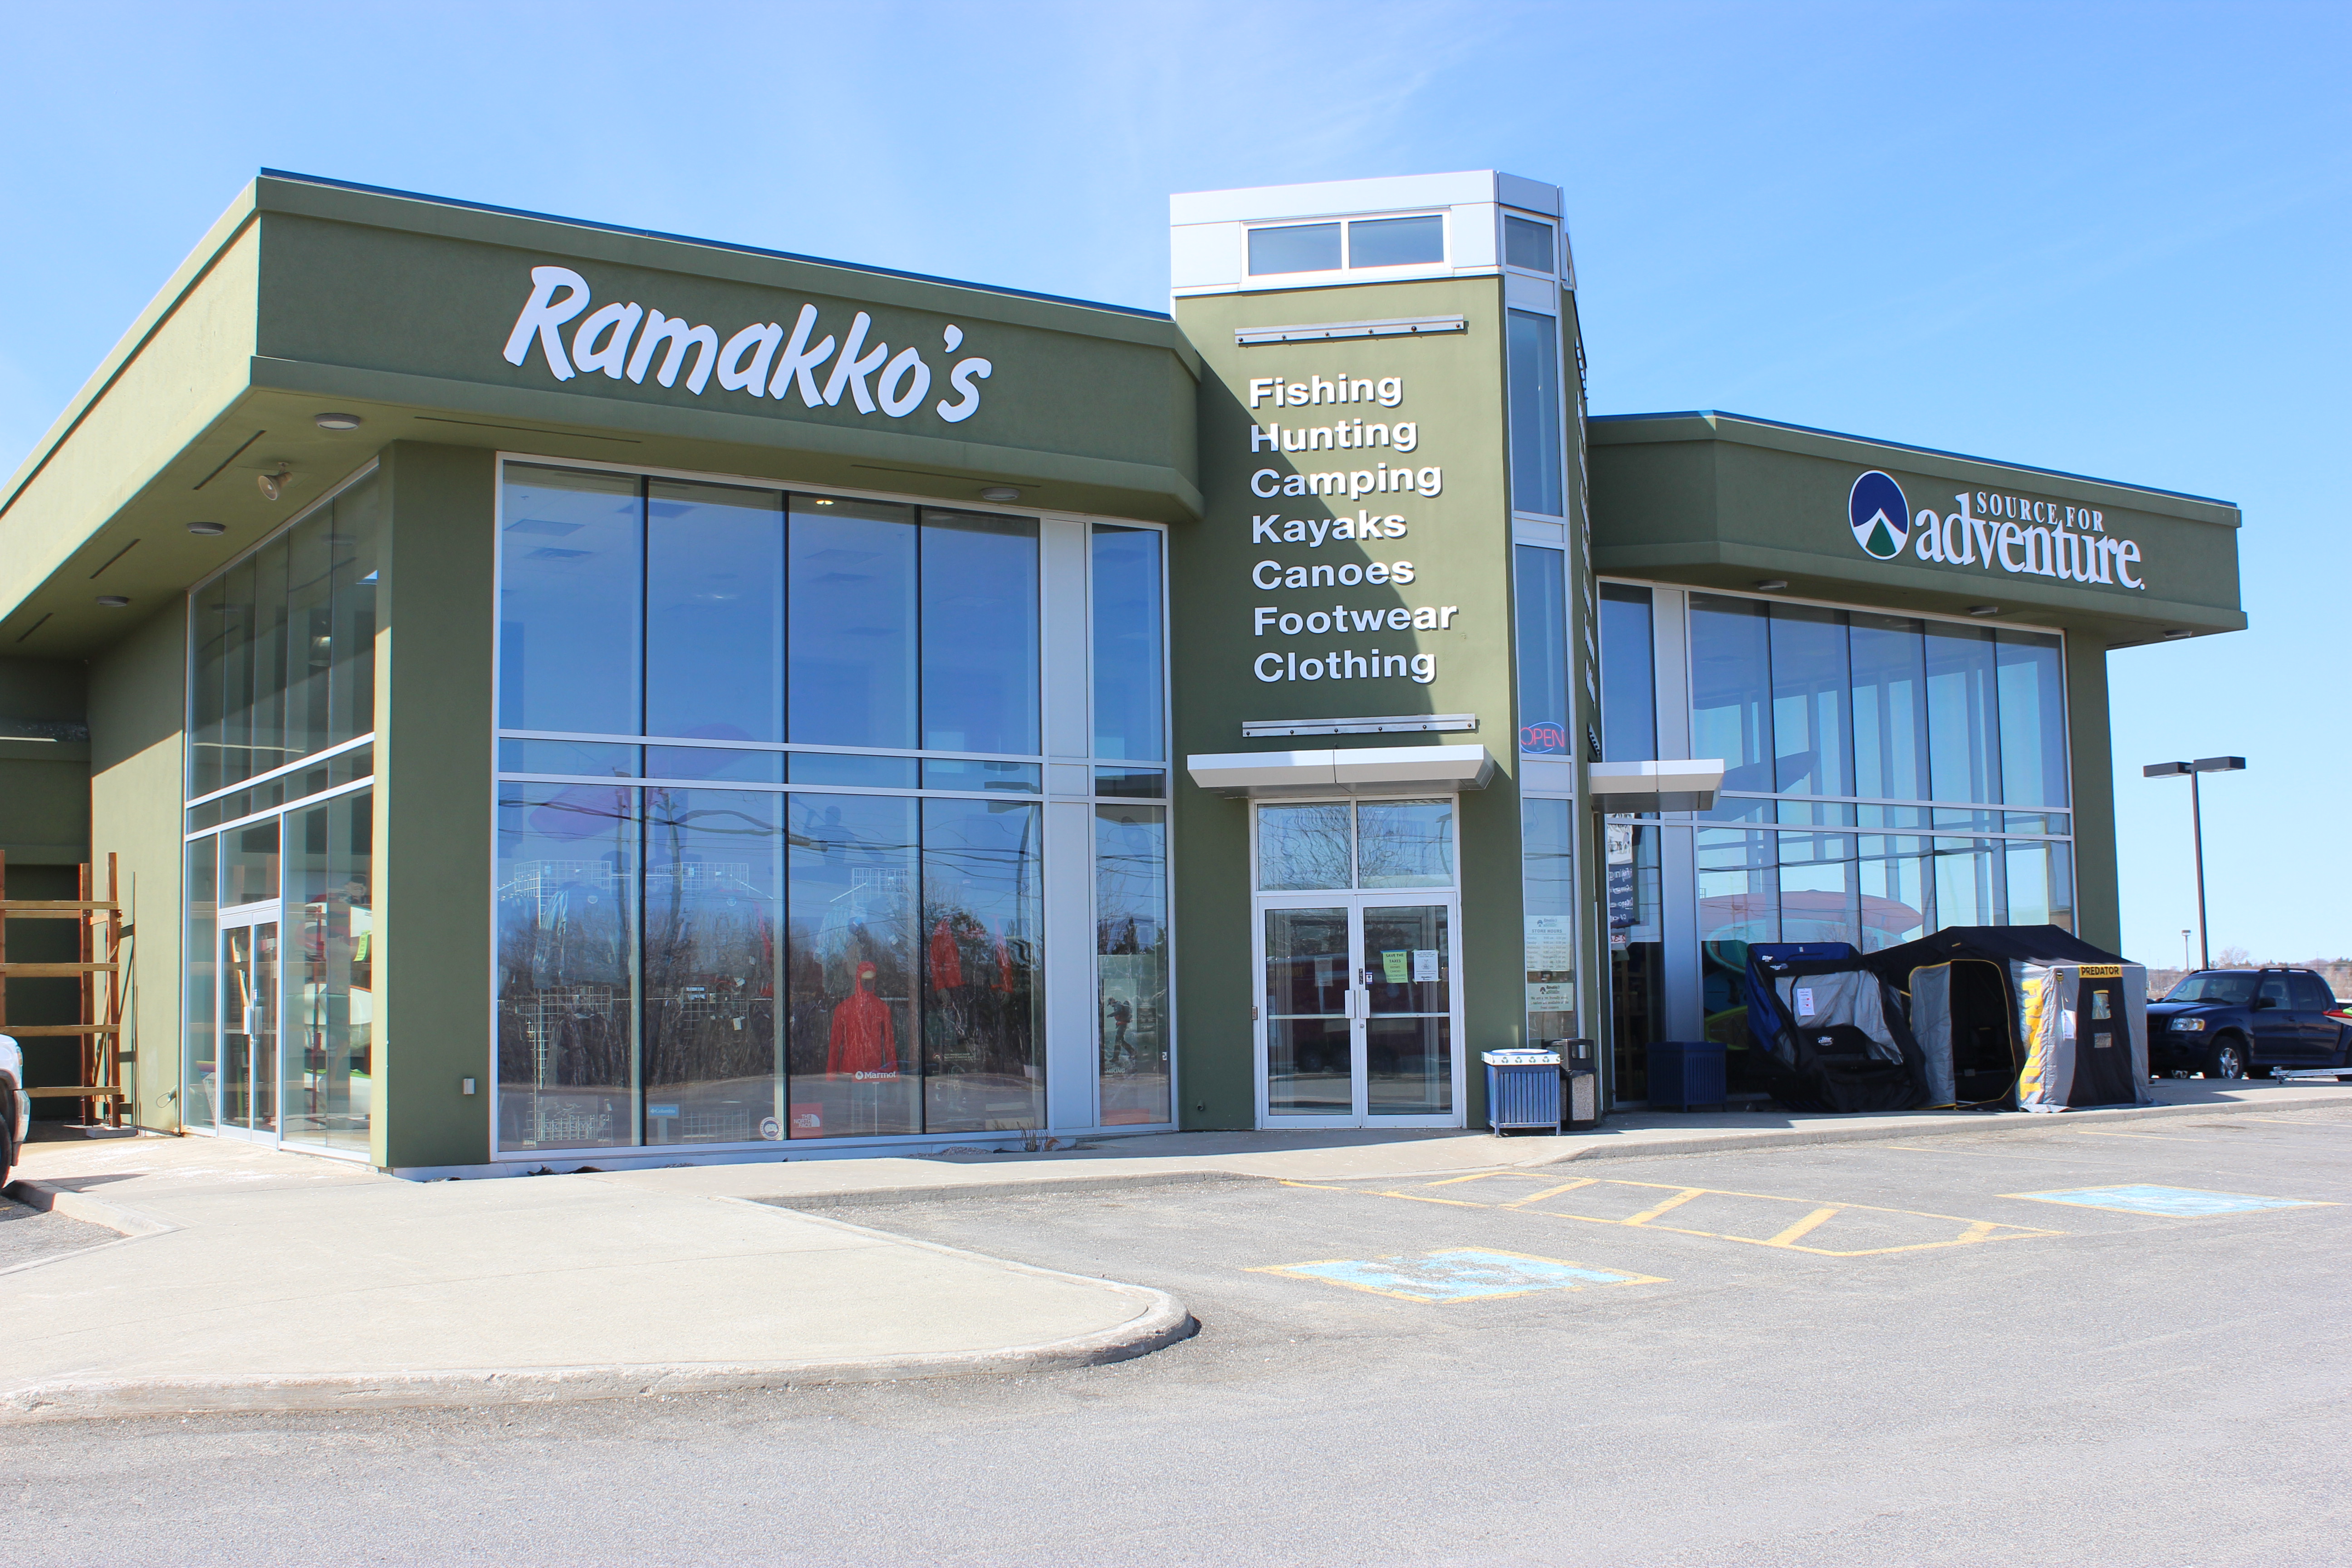 Ramakko’s Source for Adventure is Here to Help You Enjoy the Great Outdoors!